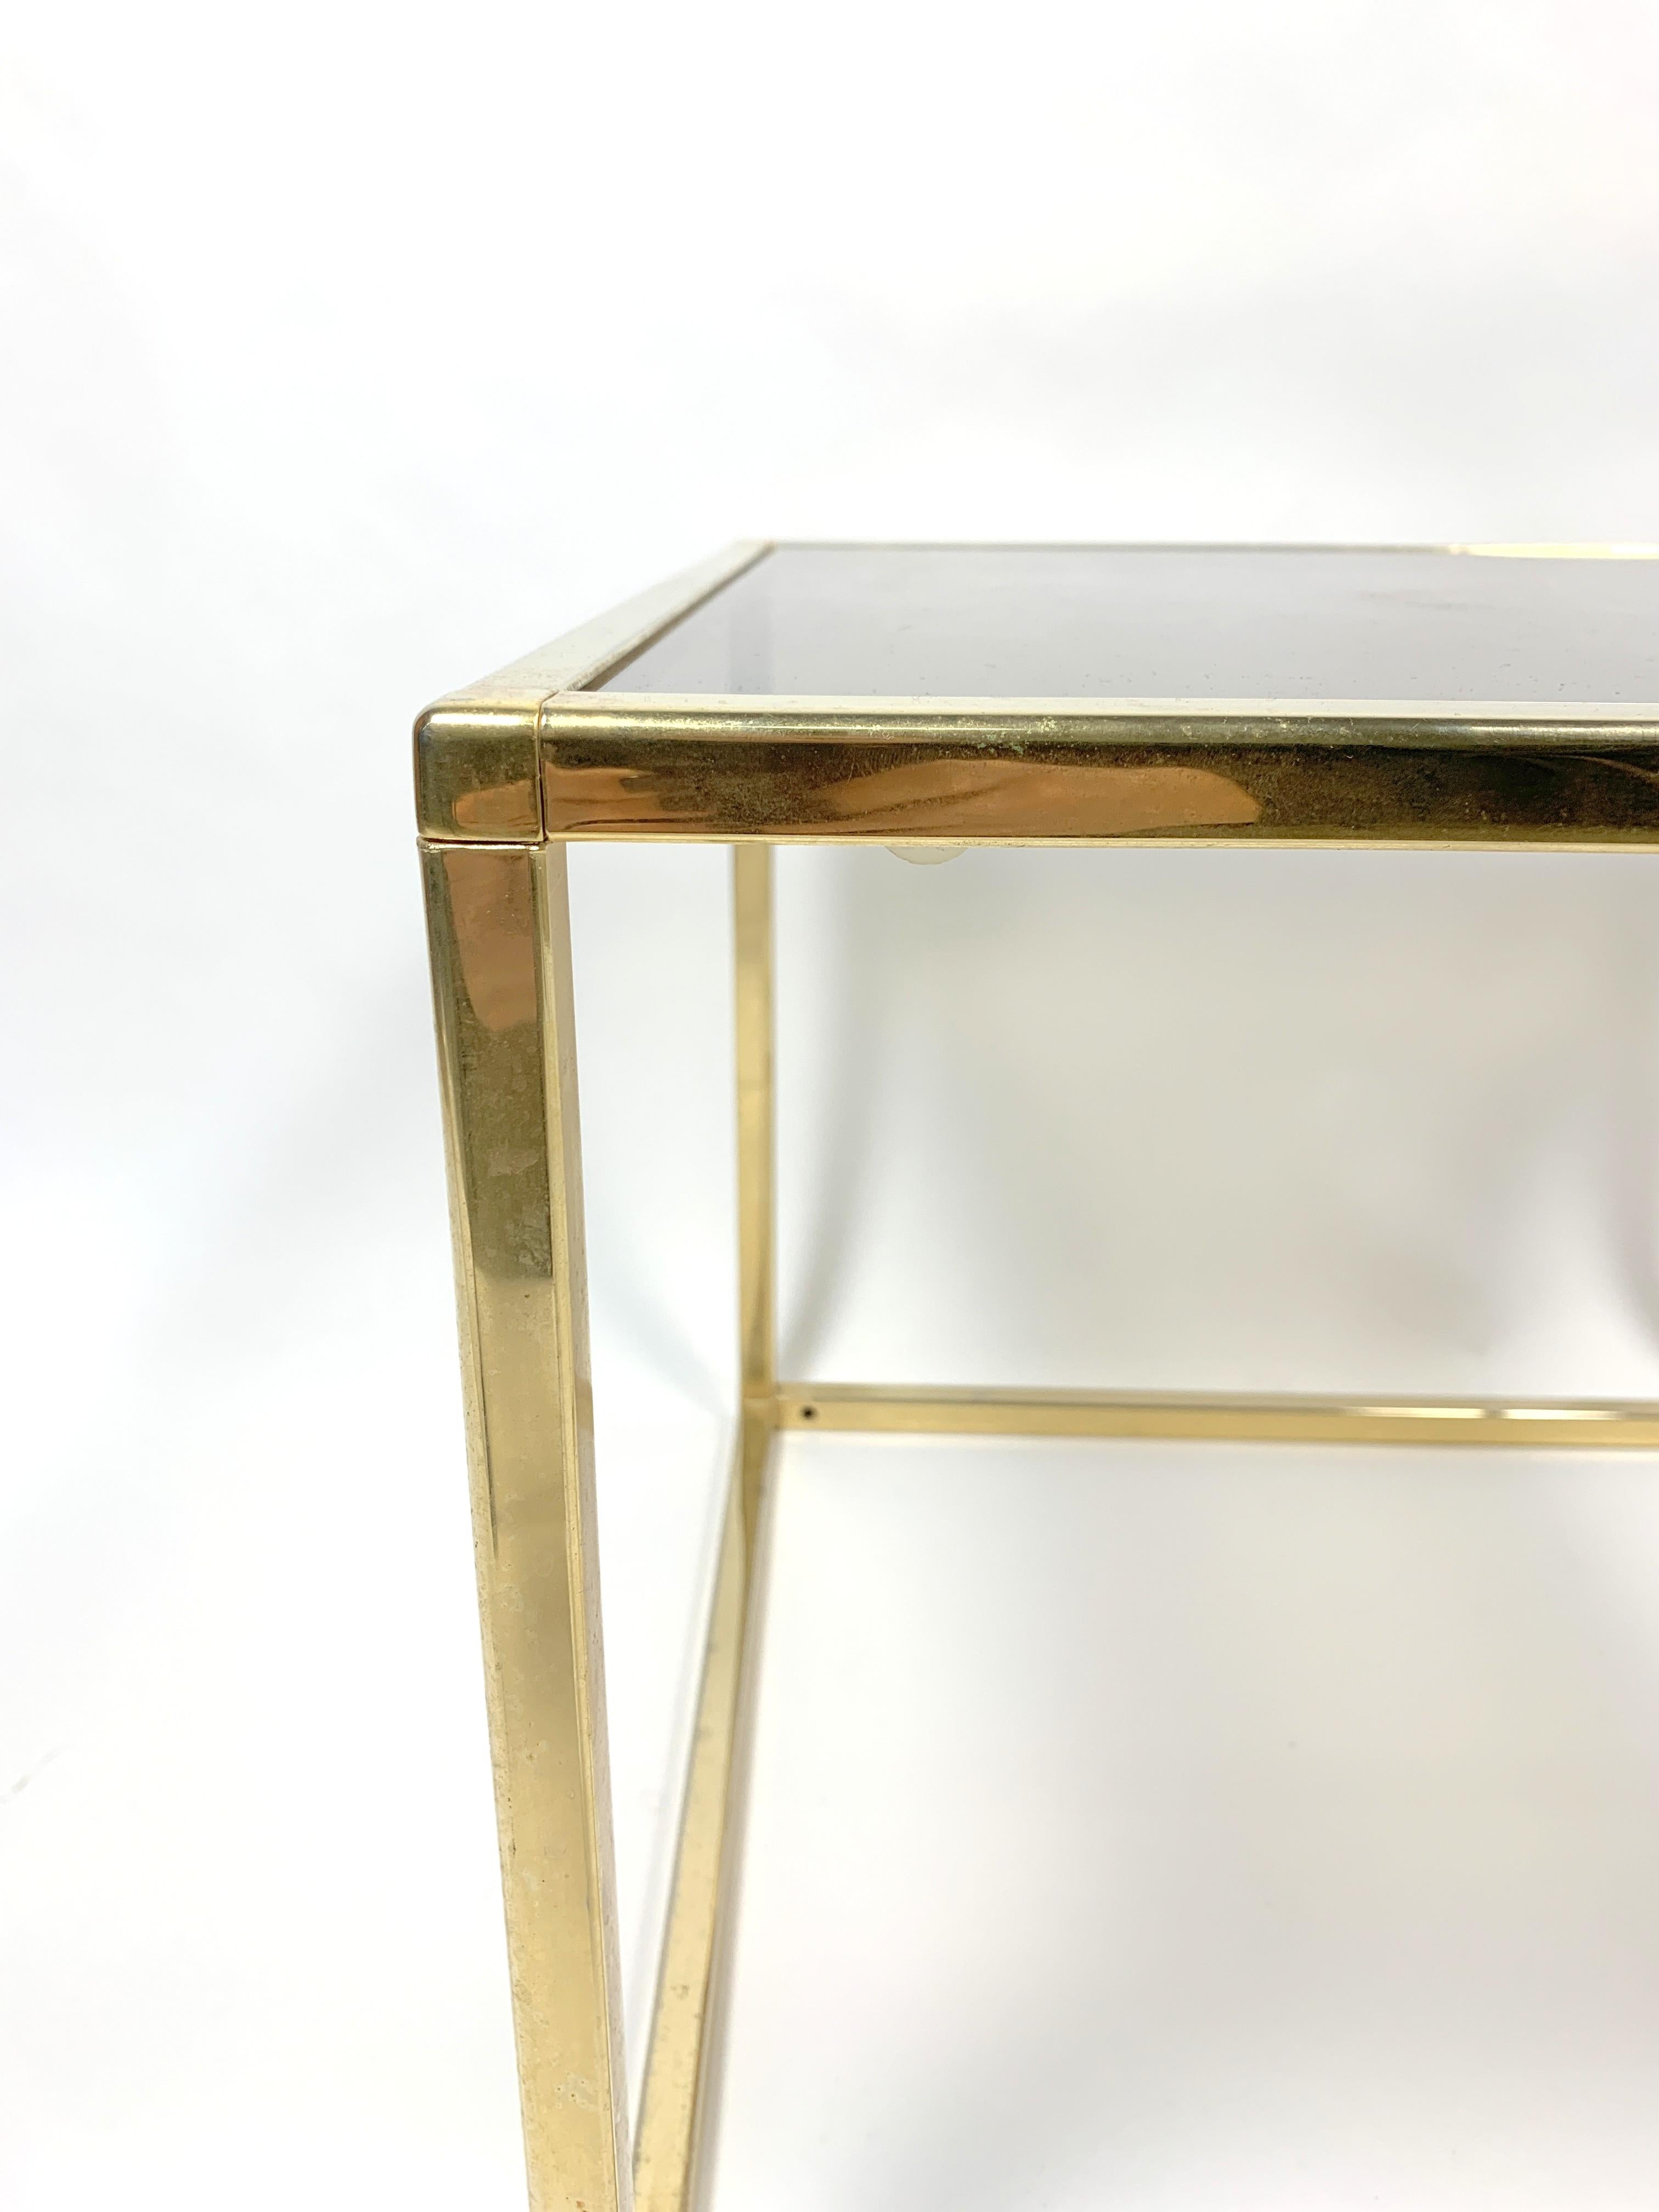 Late 20th Century Brass-Plated Rectangular Small Table with Glass Top, 1970s